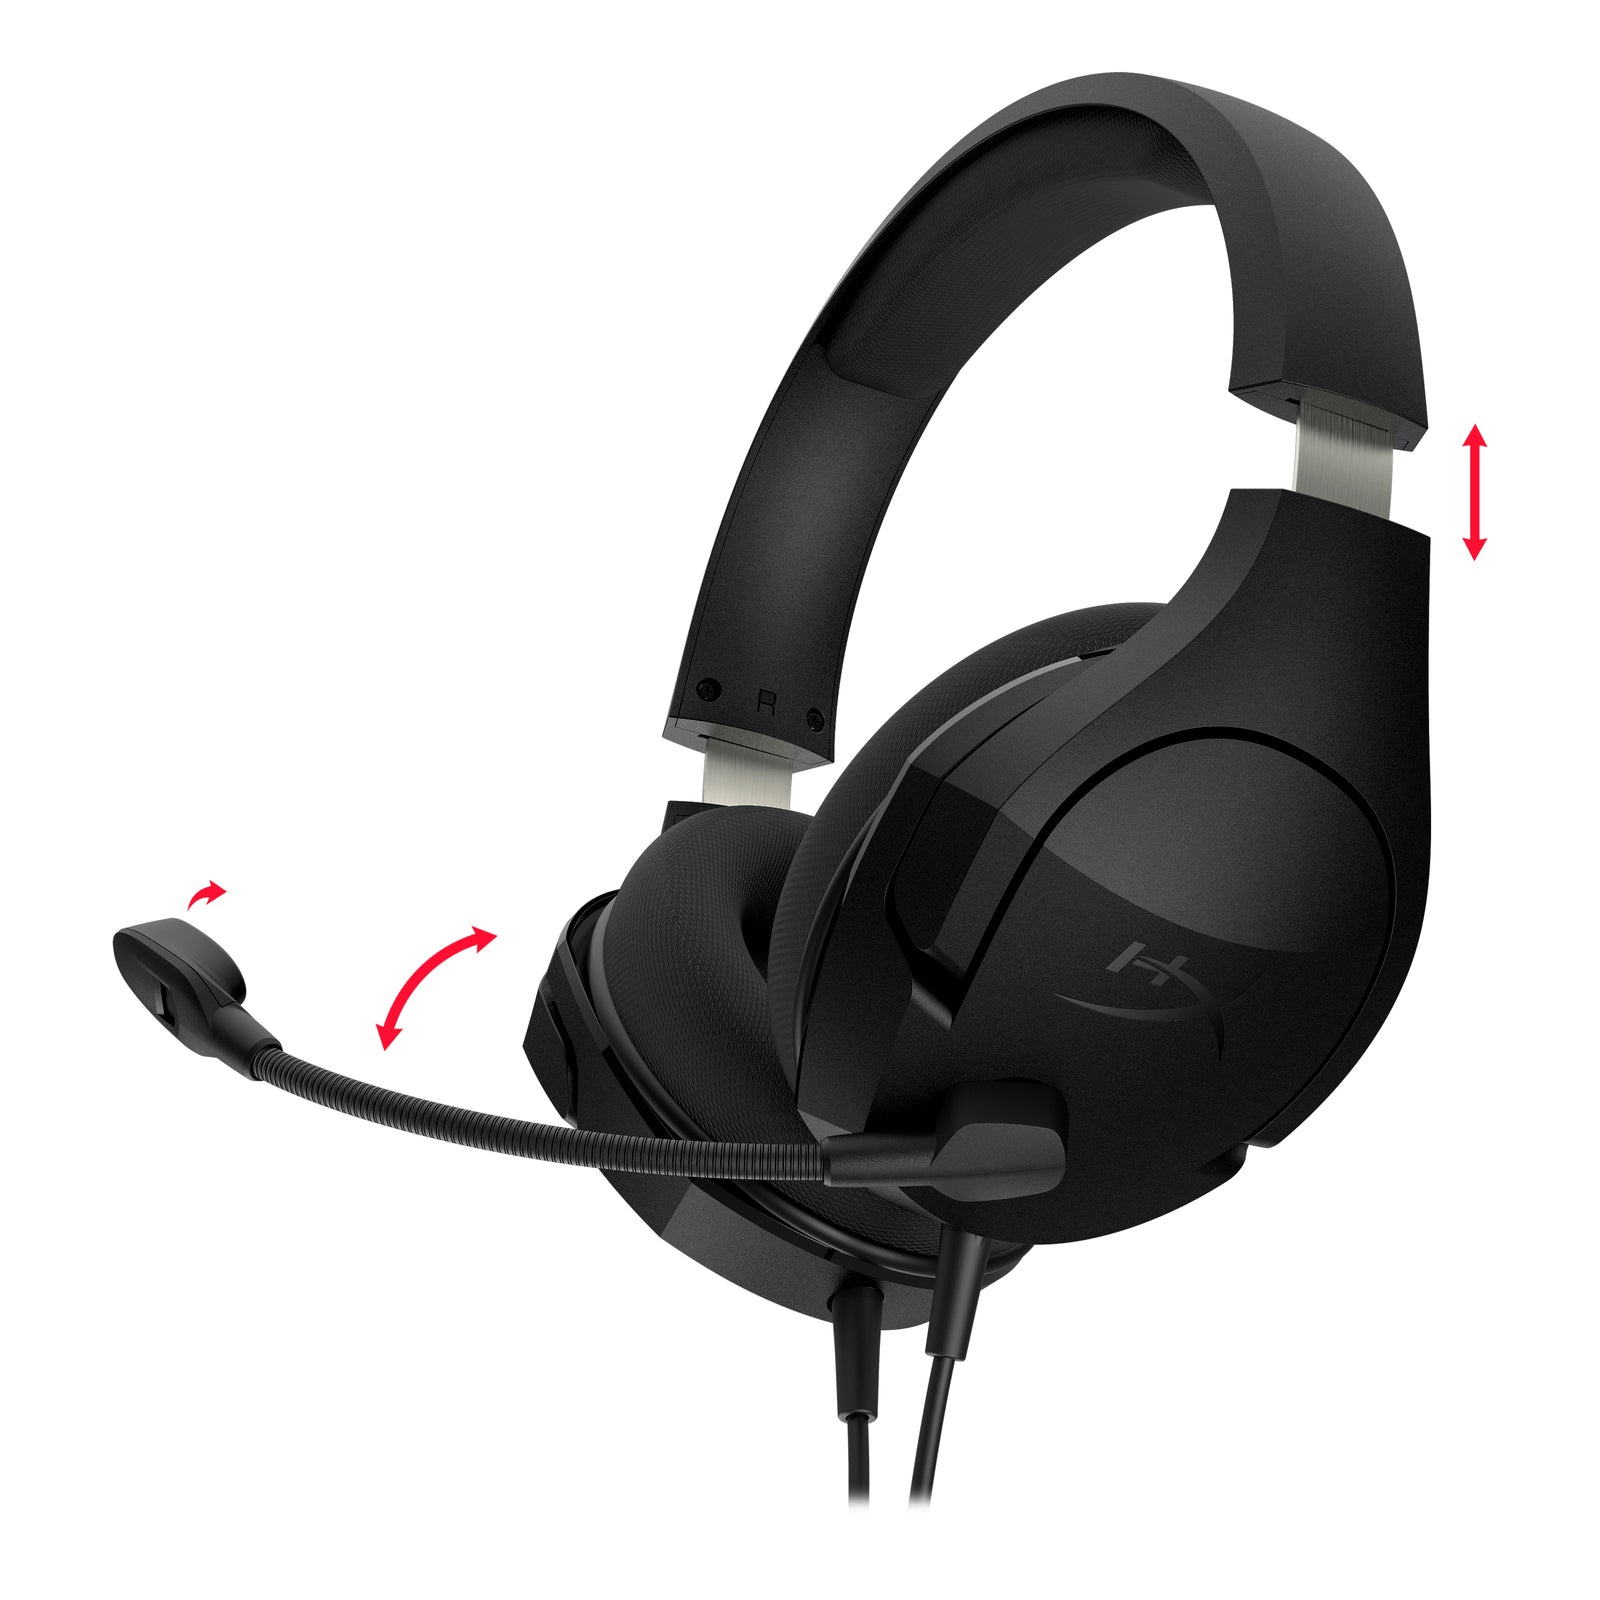 Cloud Stinger Core Gaming Headset + DTS